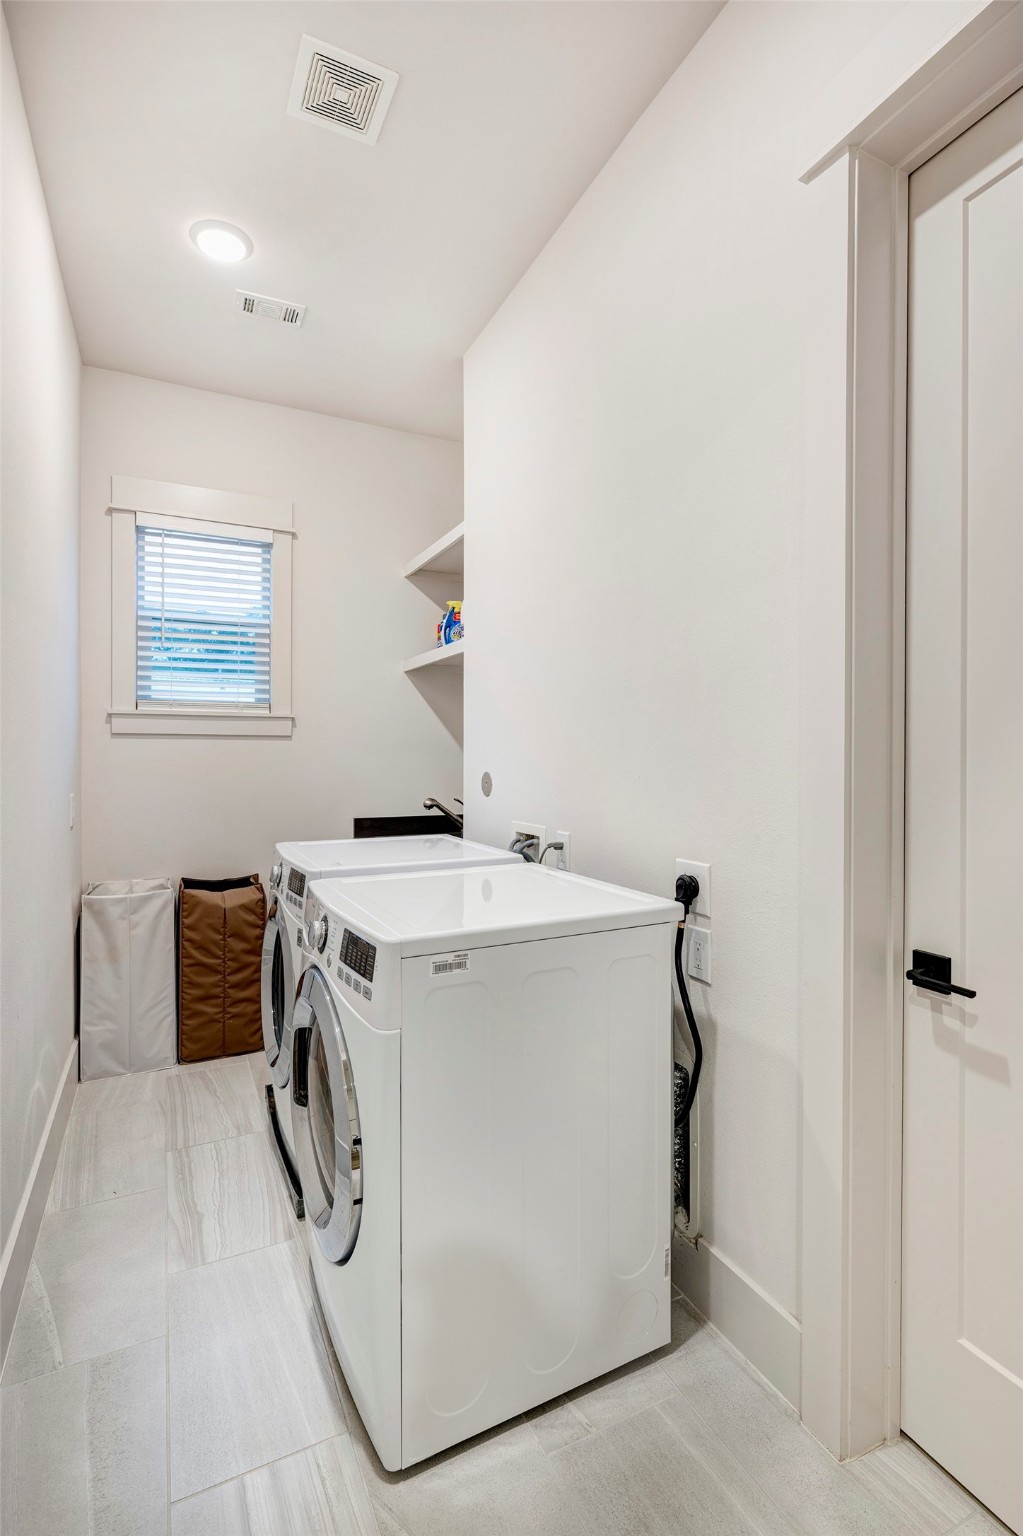 Laundry room is located upstairs and has entrance from the hallway and the 2nd walk-in closet of the primary bedroom. Soaking sink too.